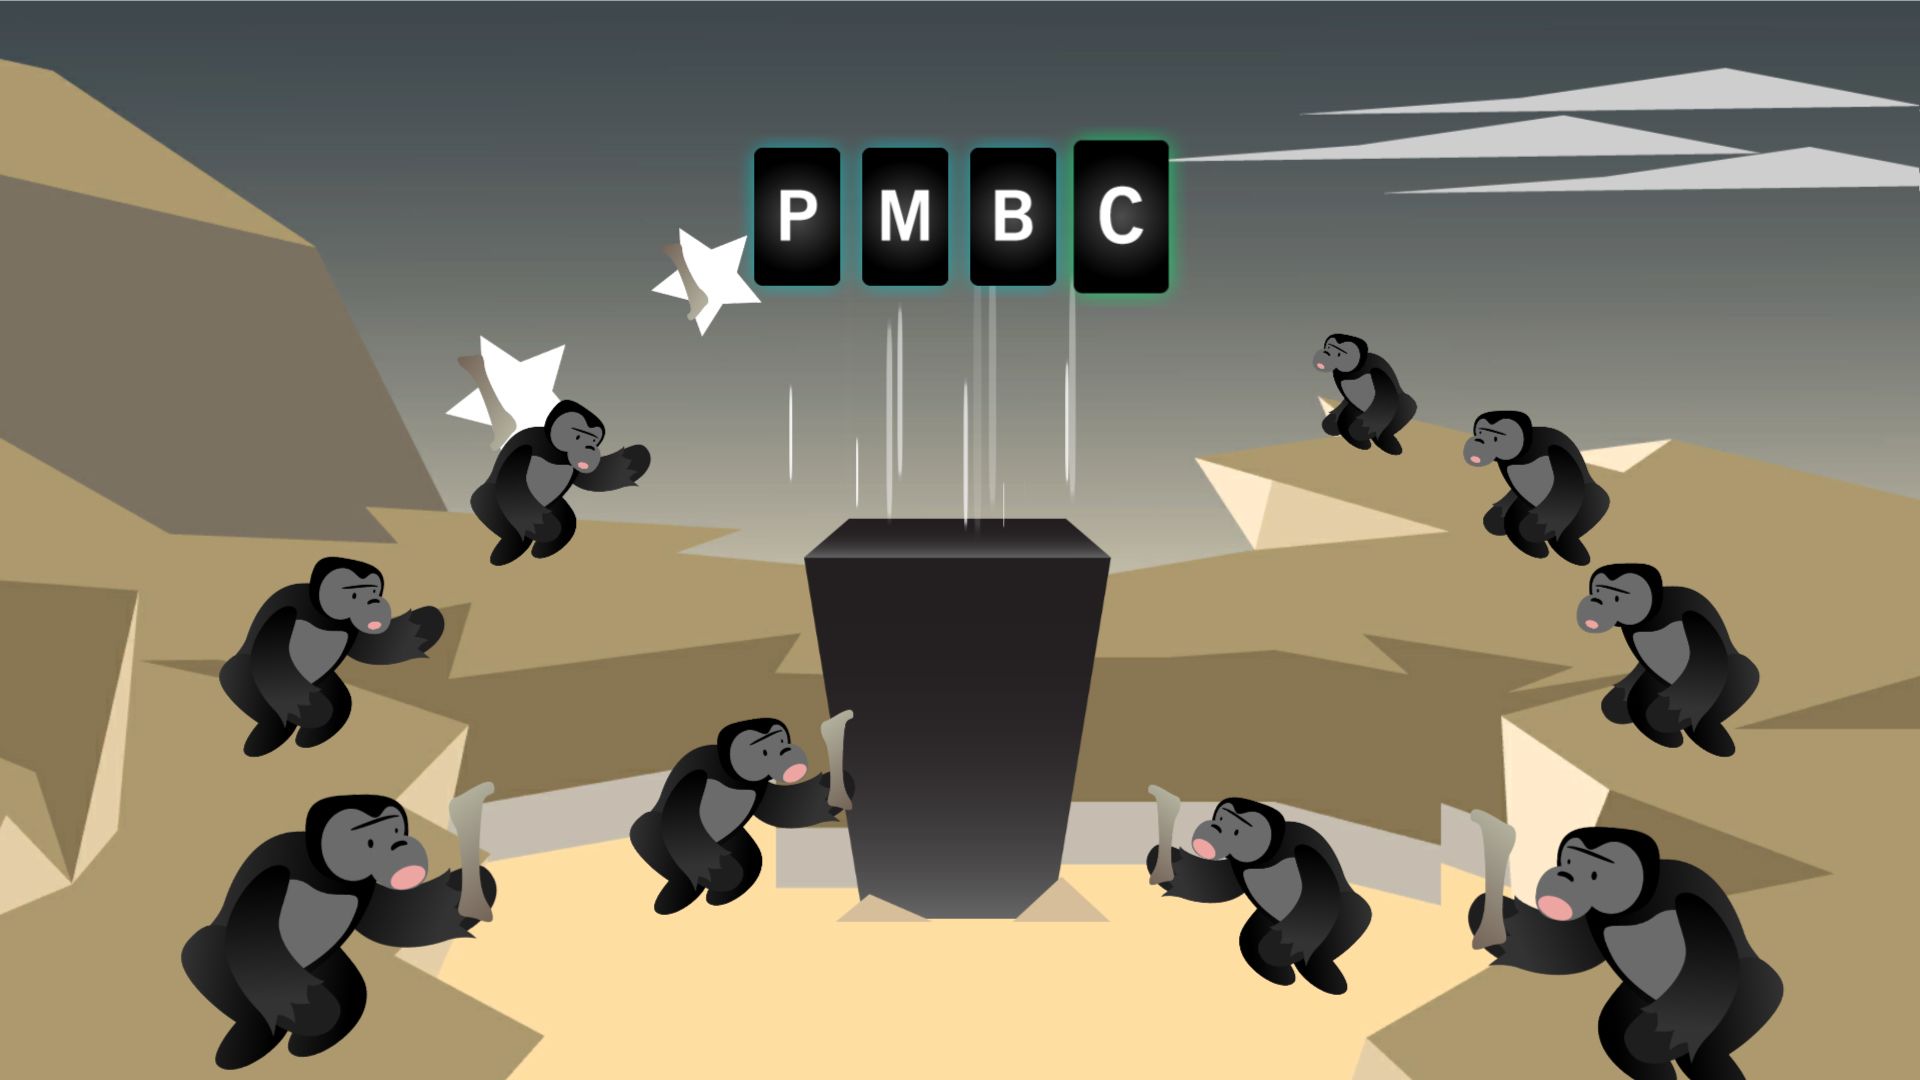 screenshot of game displaying apes surrounding a monolith with the letters PMBC above